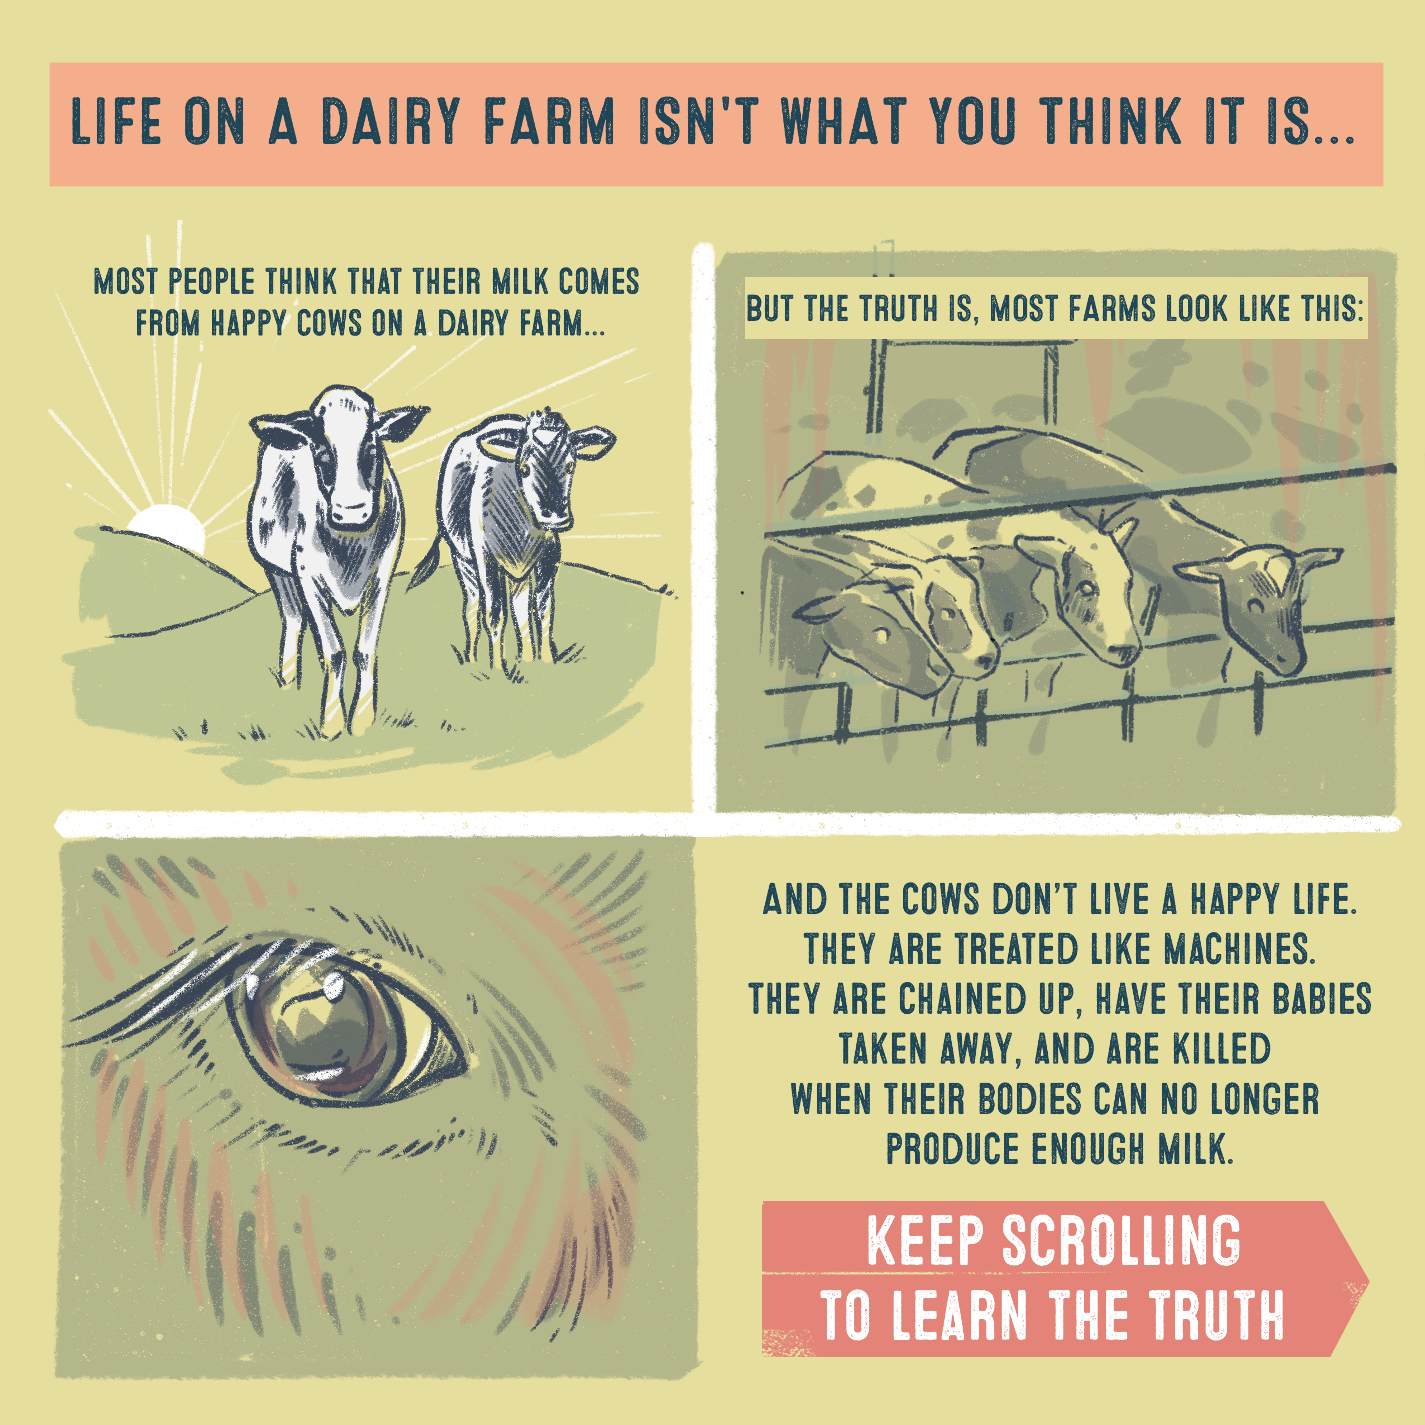  And the cows don’t live a happy life. They are treated like machines. They are chained up, have their babies taken away, and are killed when their bodies can no longer produce enough milk.  Keep scrolling to learn the truth 